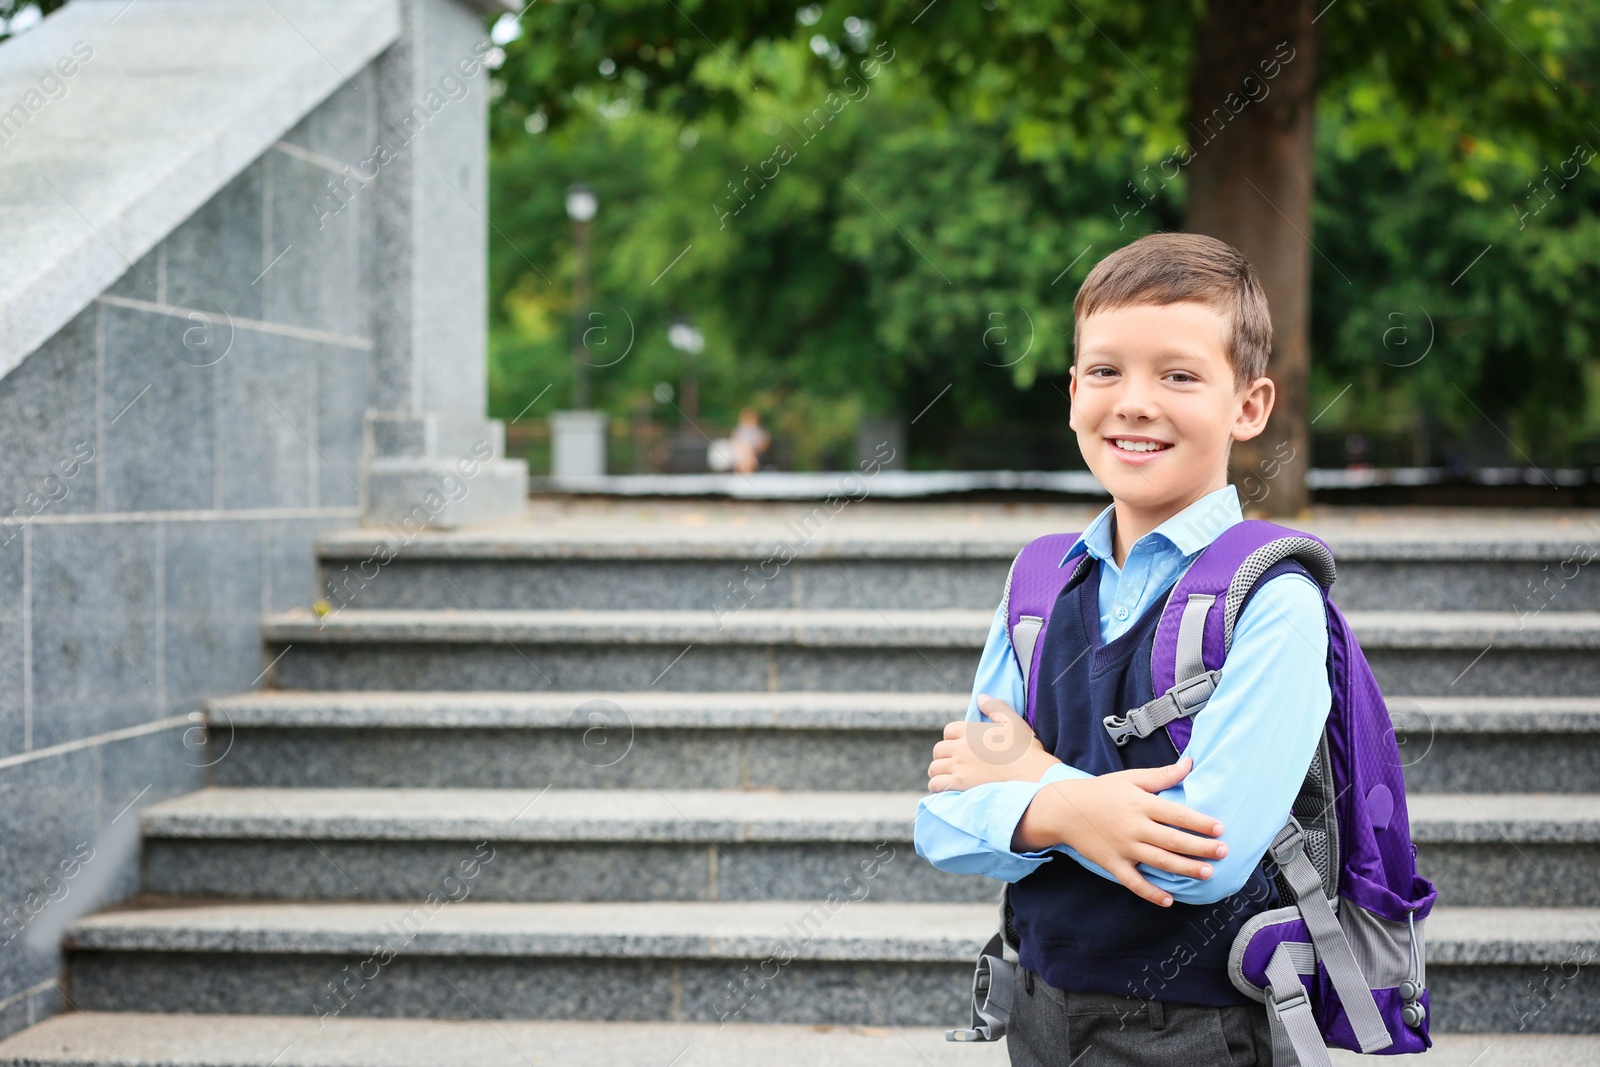 Photo of Cute school child with backpack near stairs in park